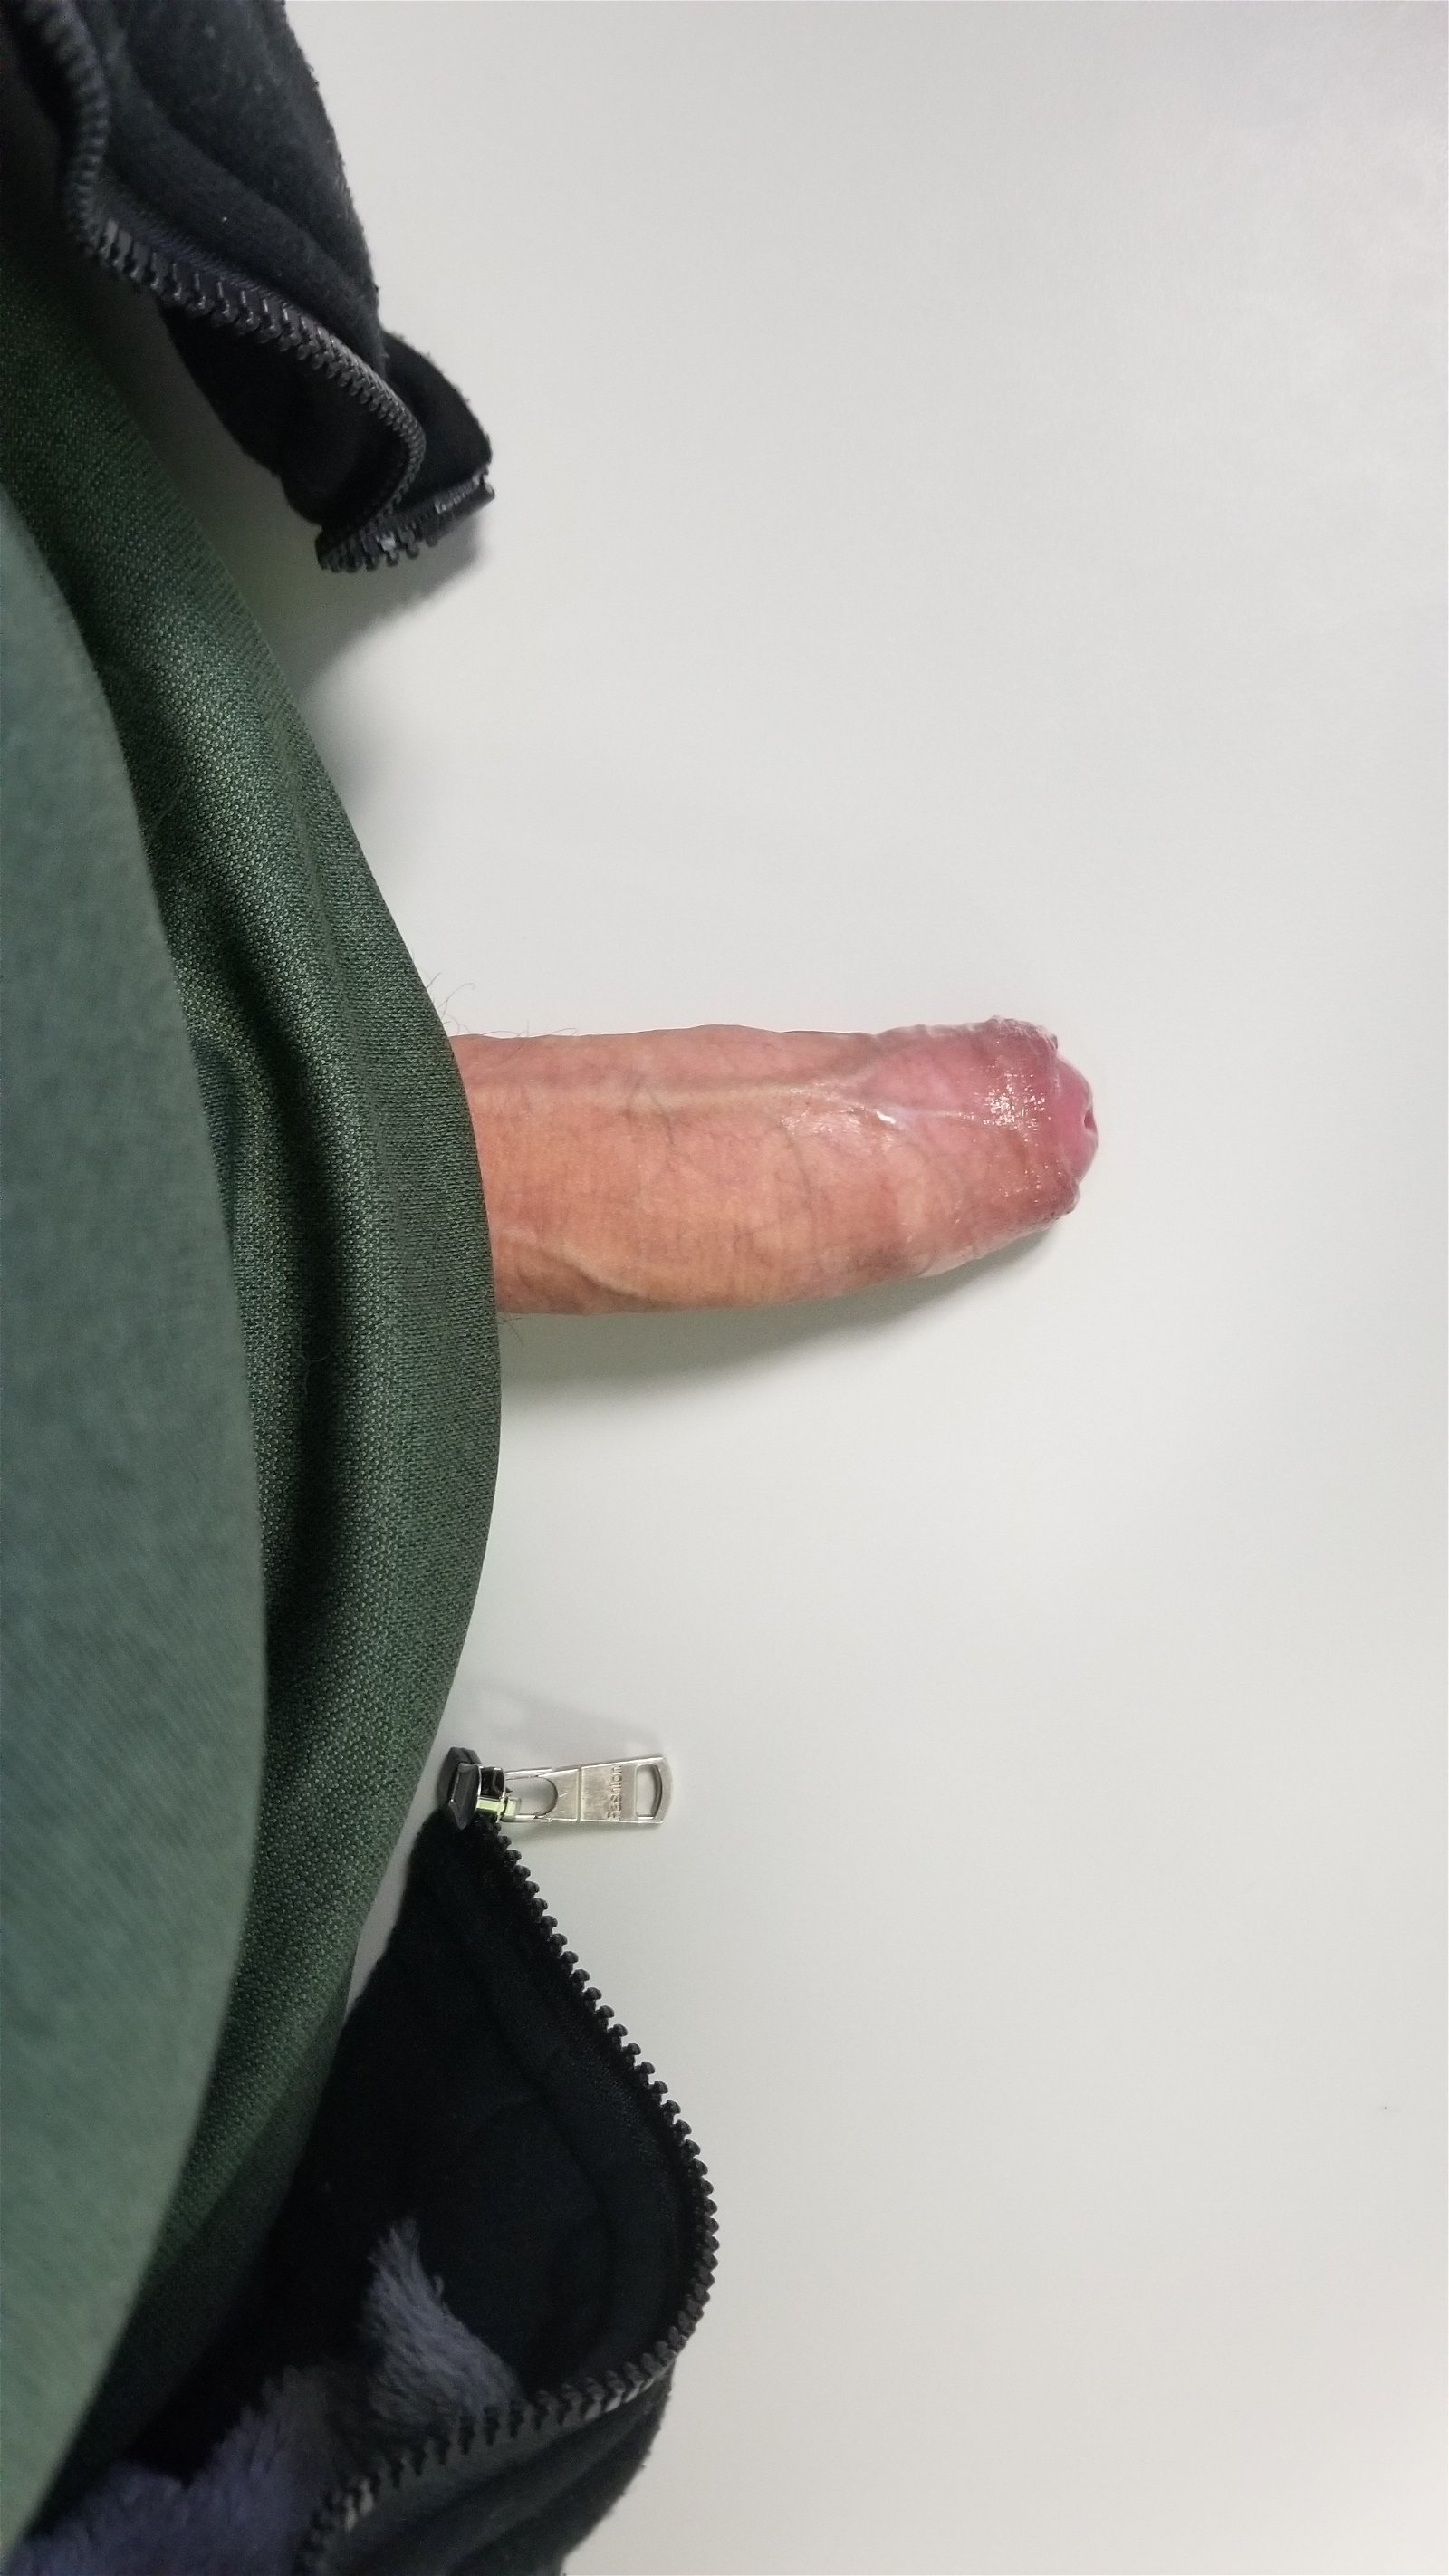 Photo by EvilFilthyPerv with the username @EvilFilthyPerv,  February 26, 2020 at 3:52 PM. The post is about the topic Kinky and Depraved and the text says 'Whipping it out at work!

The office is an open floor plan...😁

#me #cock #risk #public #work'